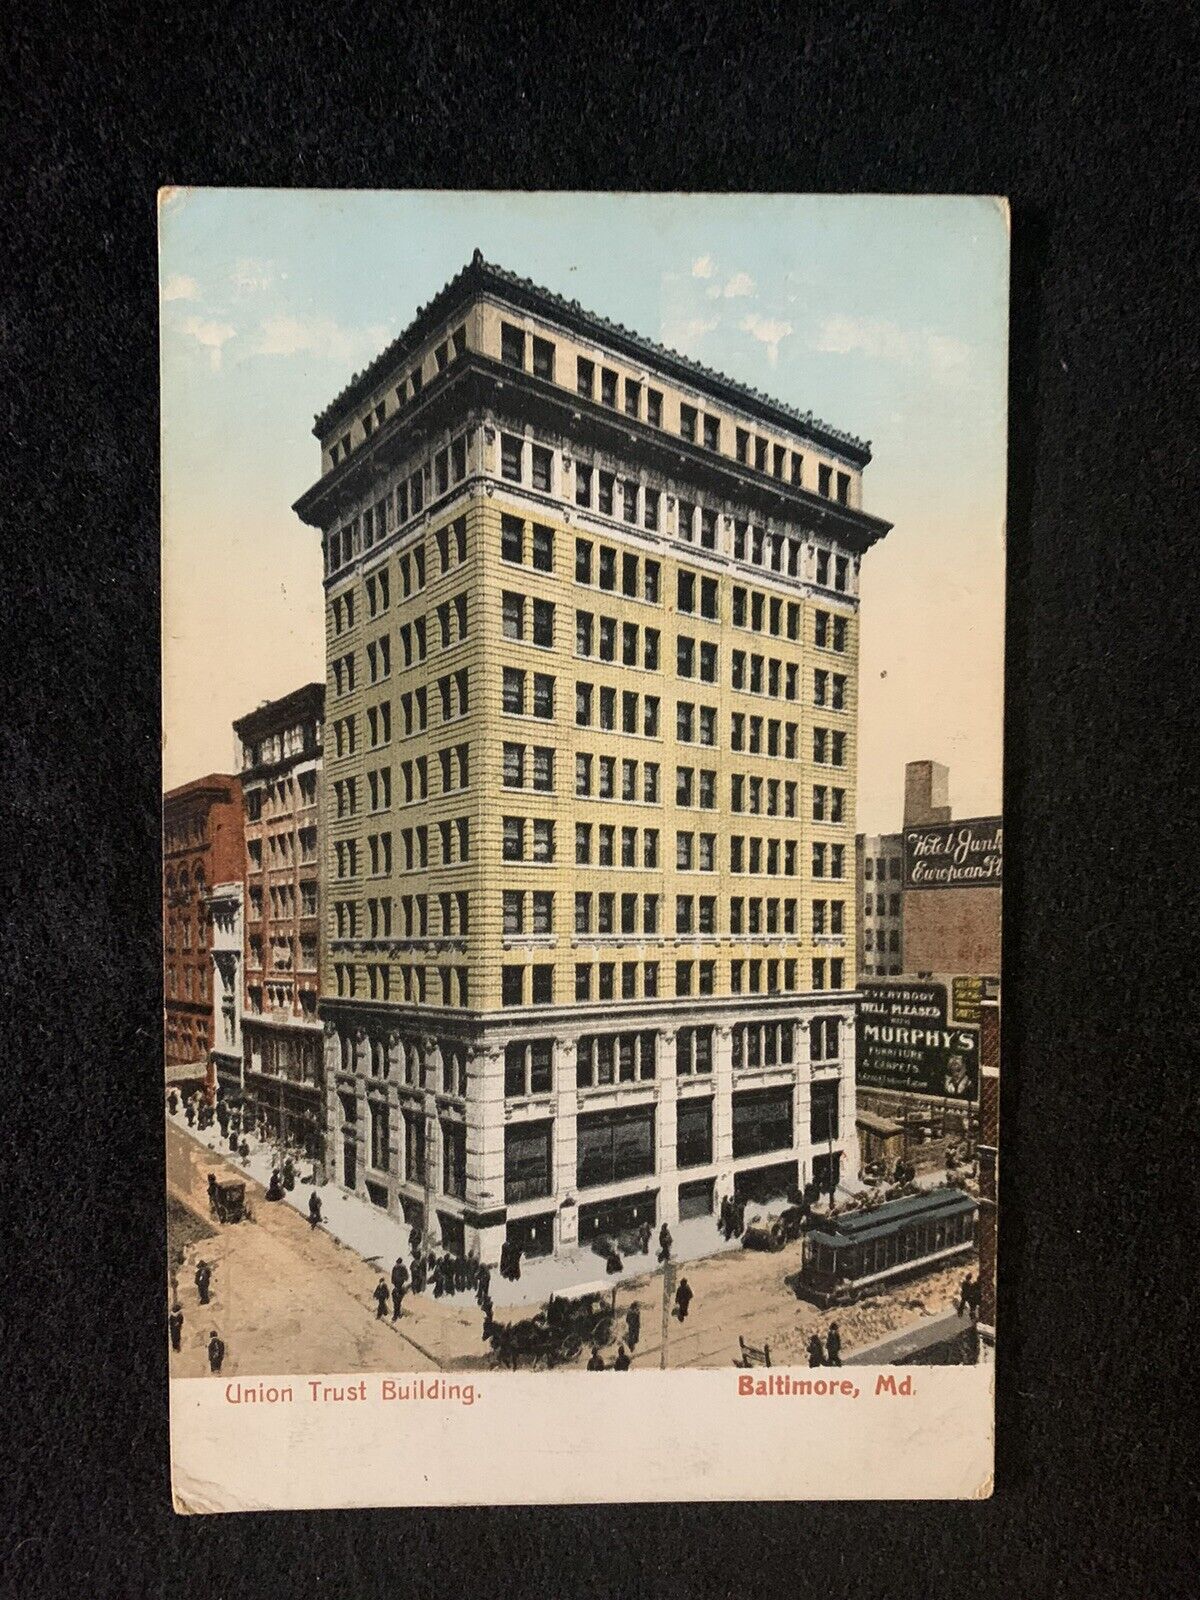 UNION TRUST BUILDING & TROLLEY BALTIMORE MARYLAND POSTCARD c. 1913 UDB Collotype